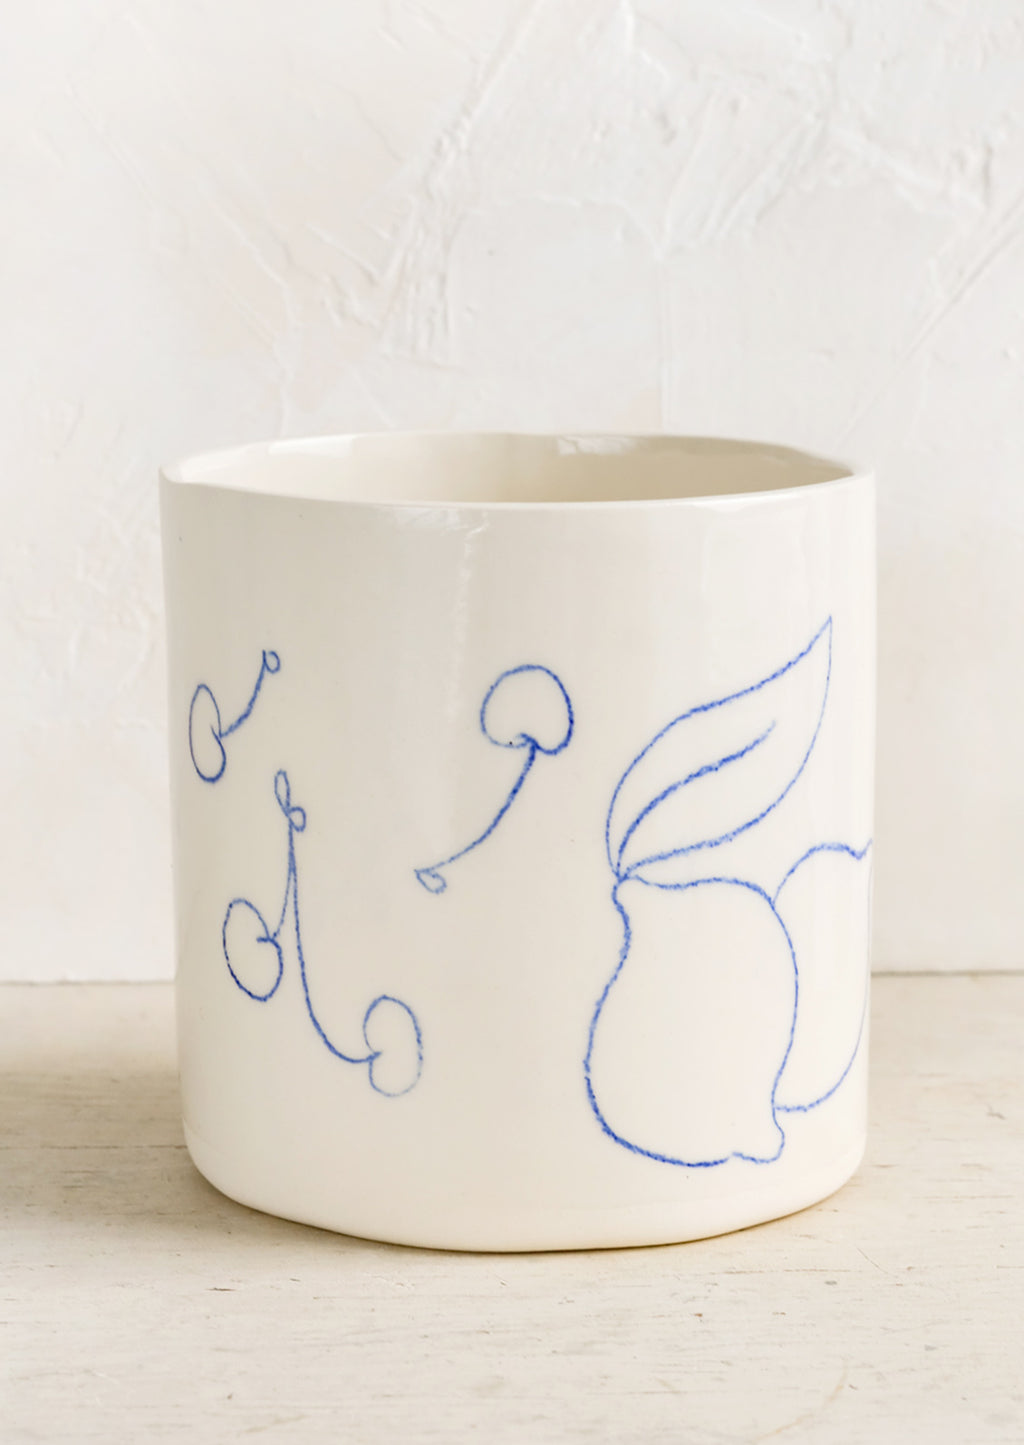 1: An ivory ceramic planter with fruit line drawings in blue.